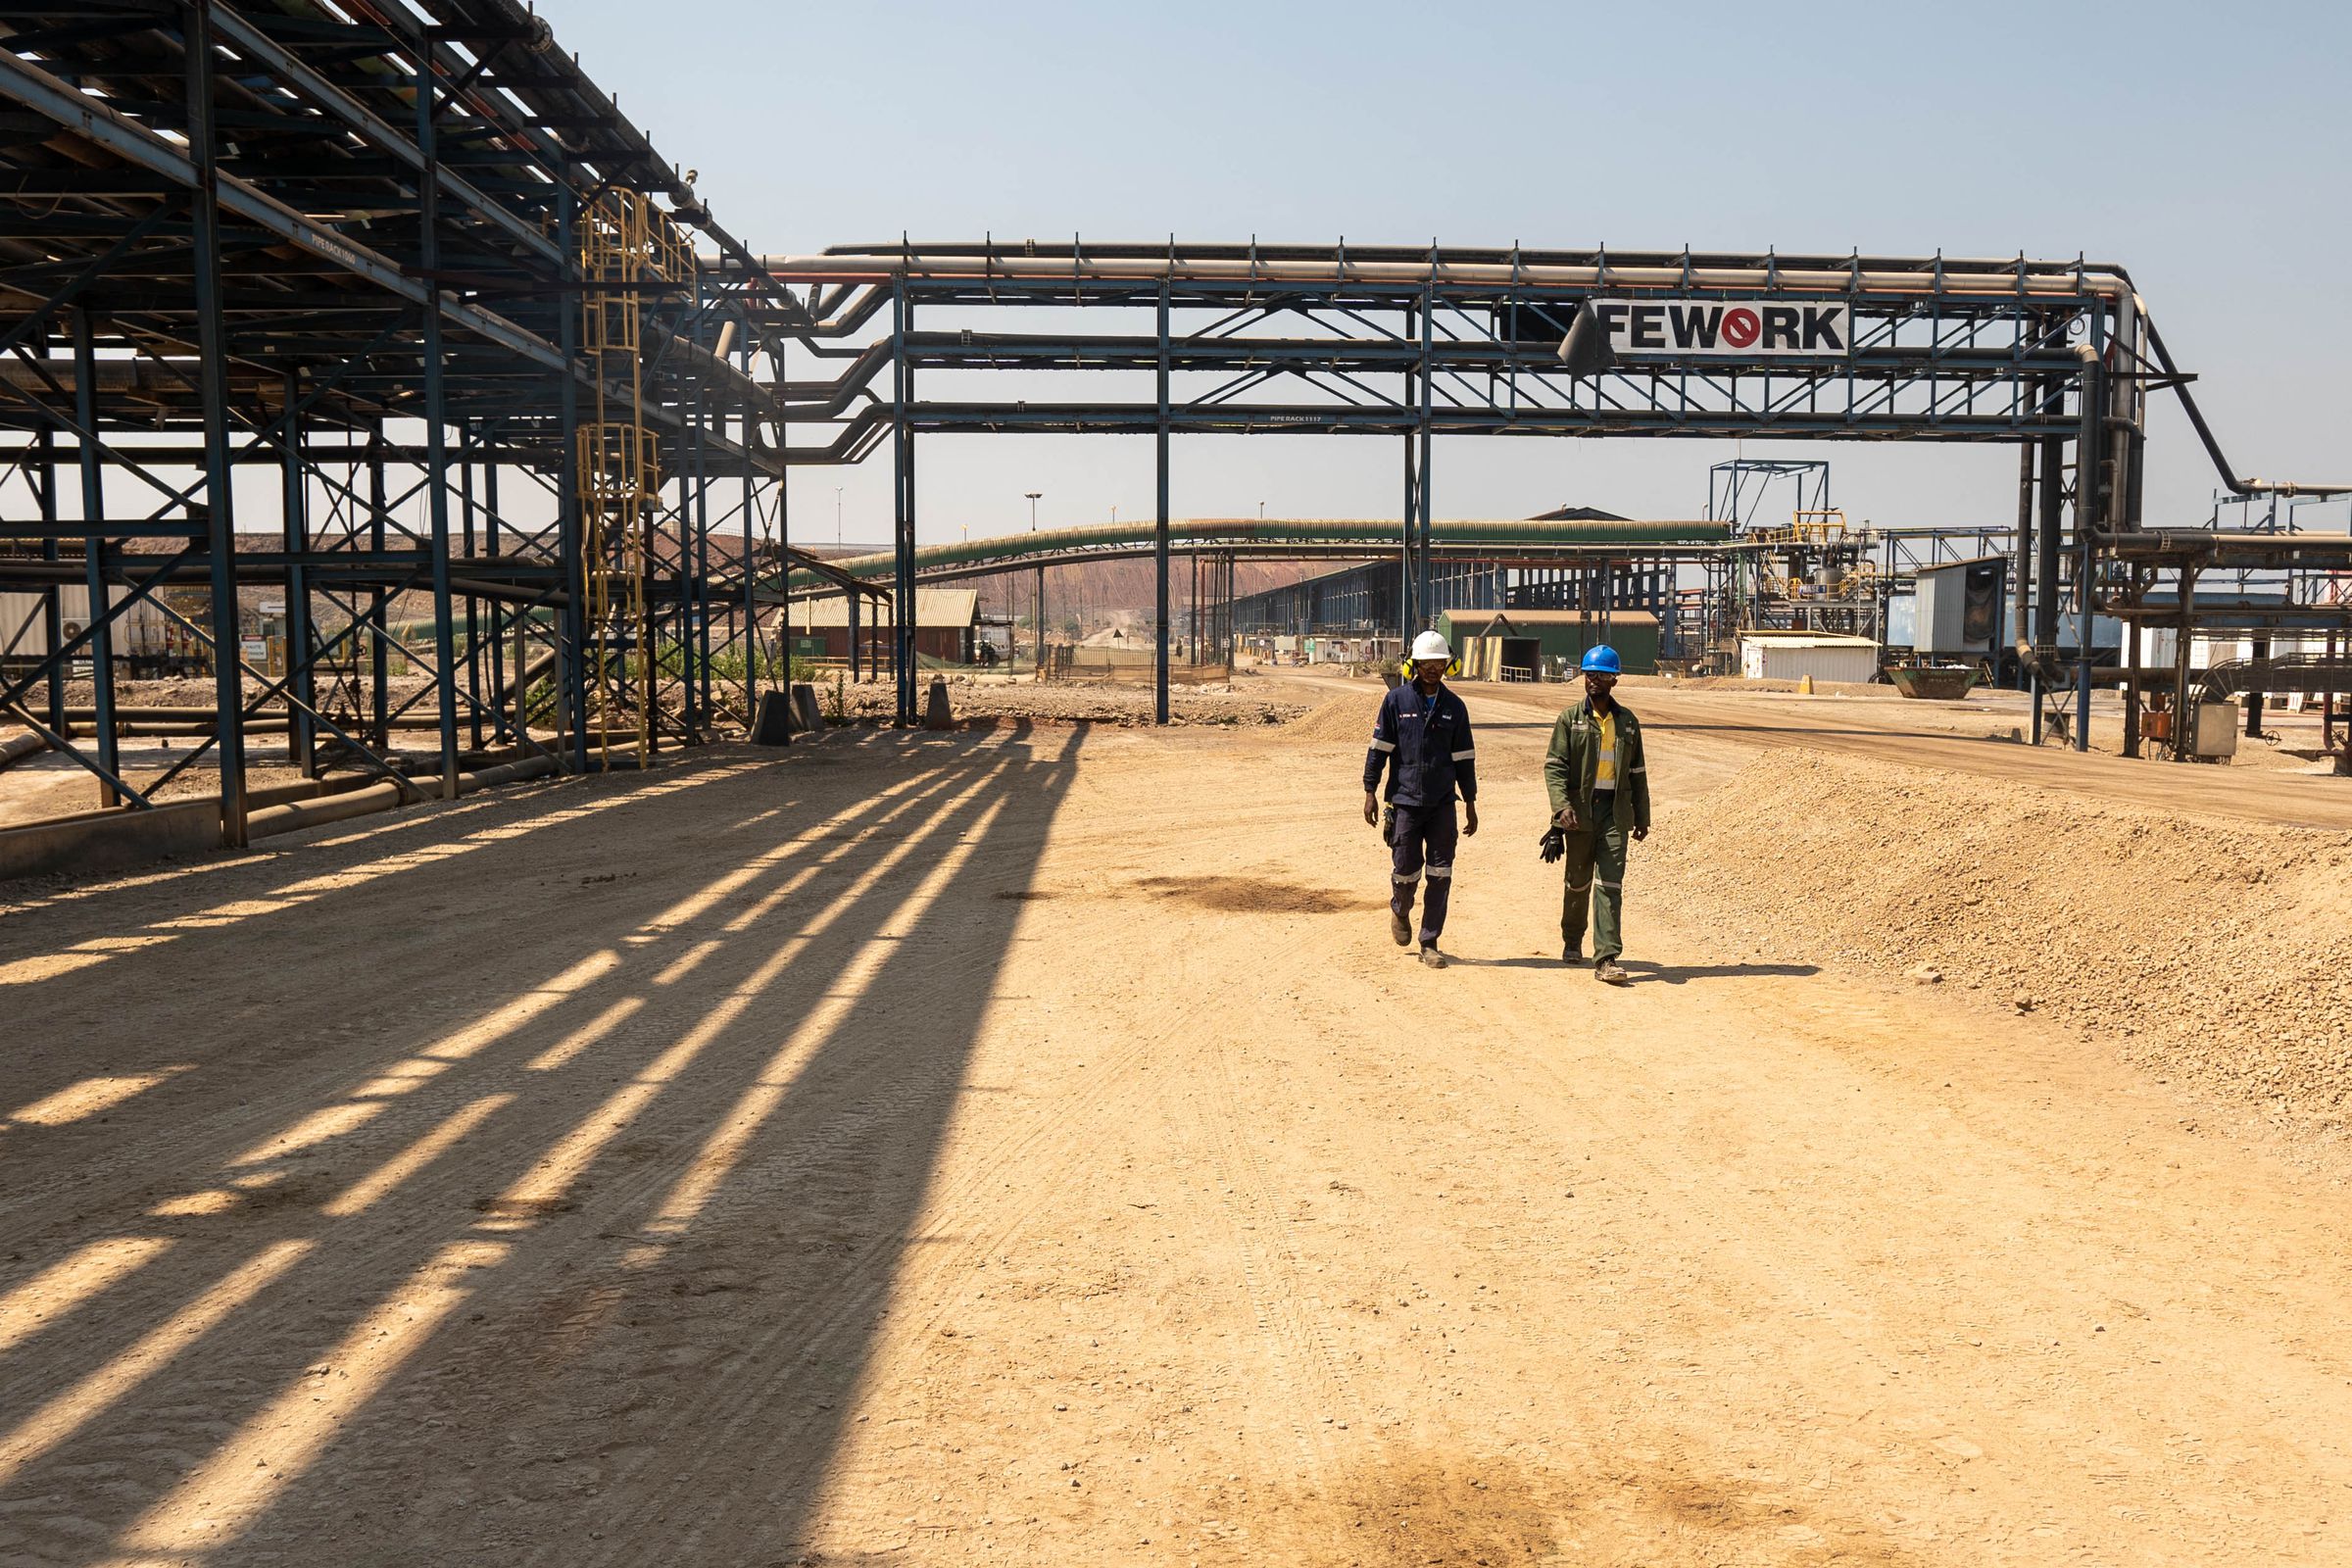 Two workers wearing hard hats walk through an industrial area.